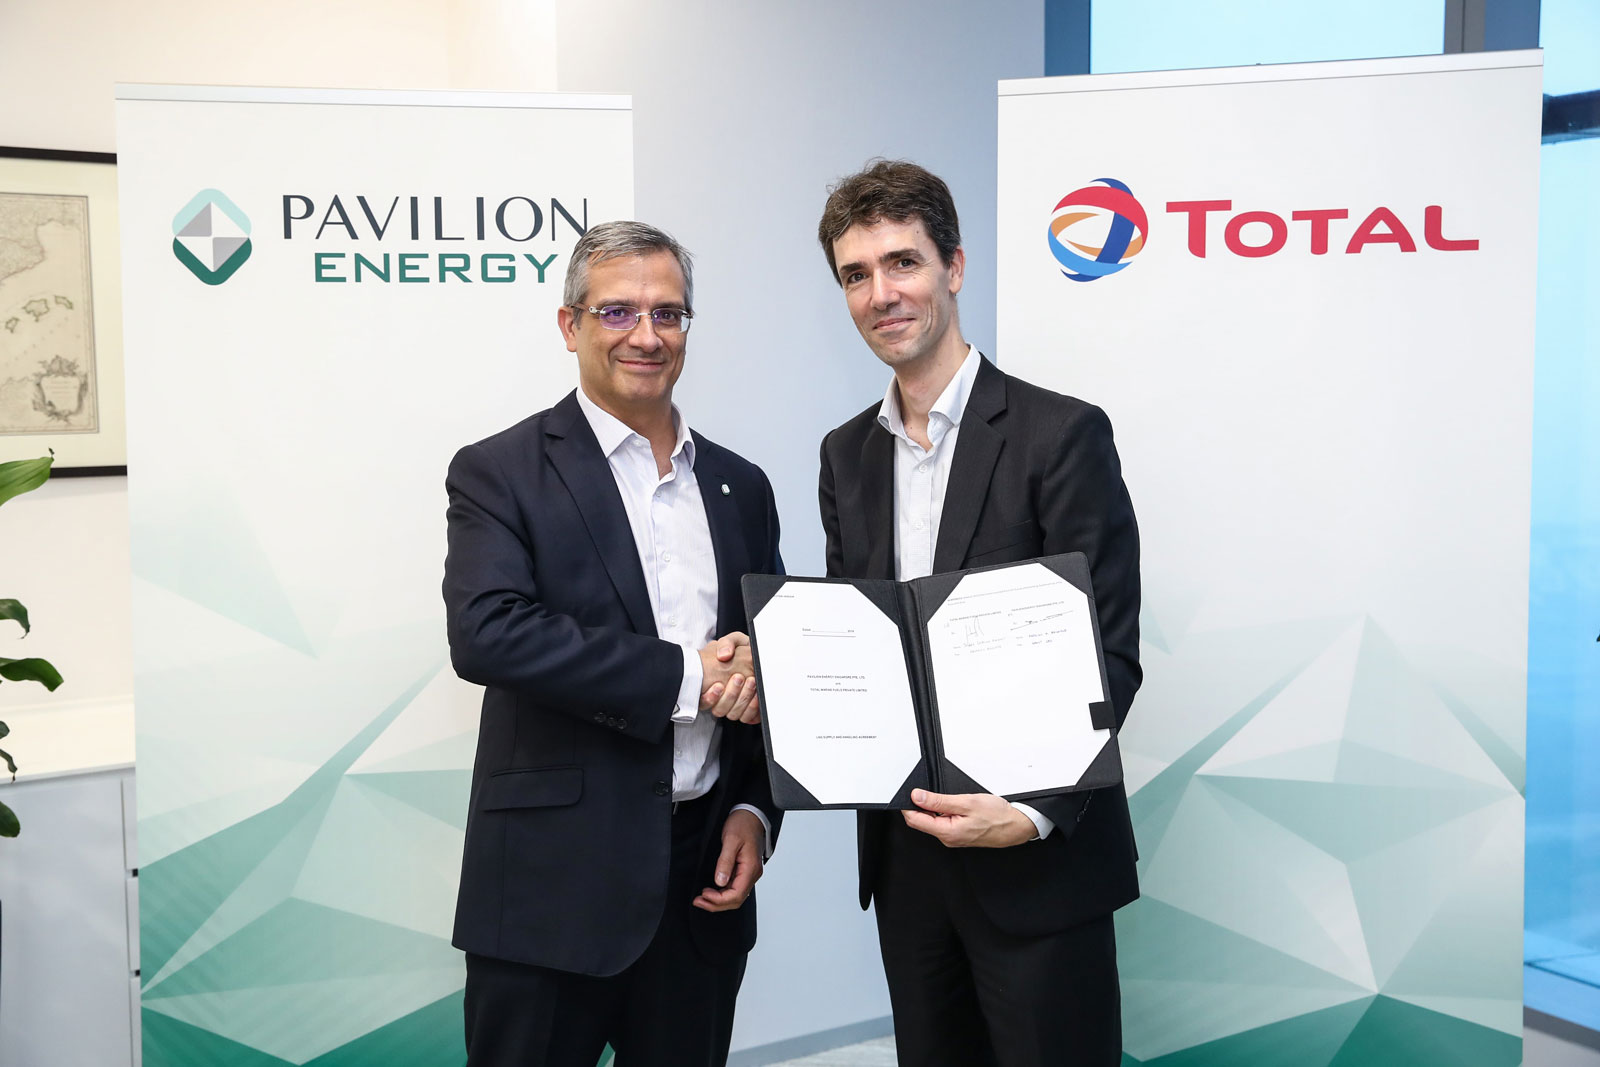 (L to R) Mr Frédéric H. Barnaud, Group CEO of Pavilion Energy and Mr Jerôme Leprince-Ringuet, Managing Director of Total Marine Fuels Global Solutions.